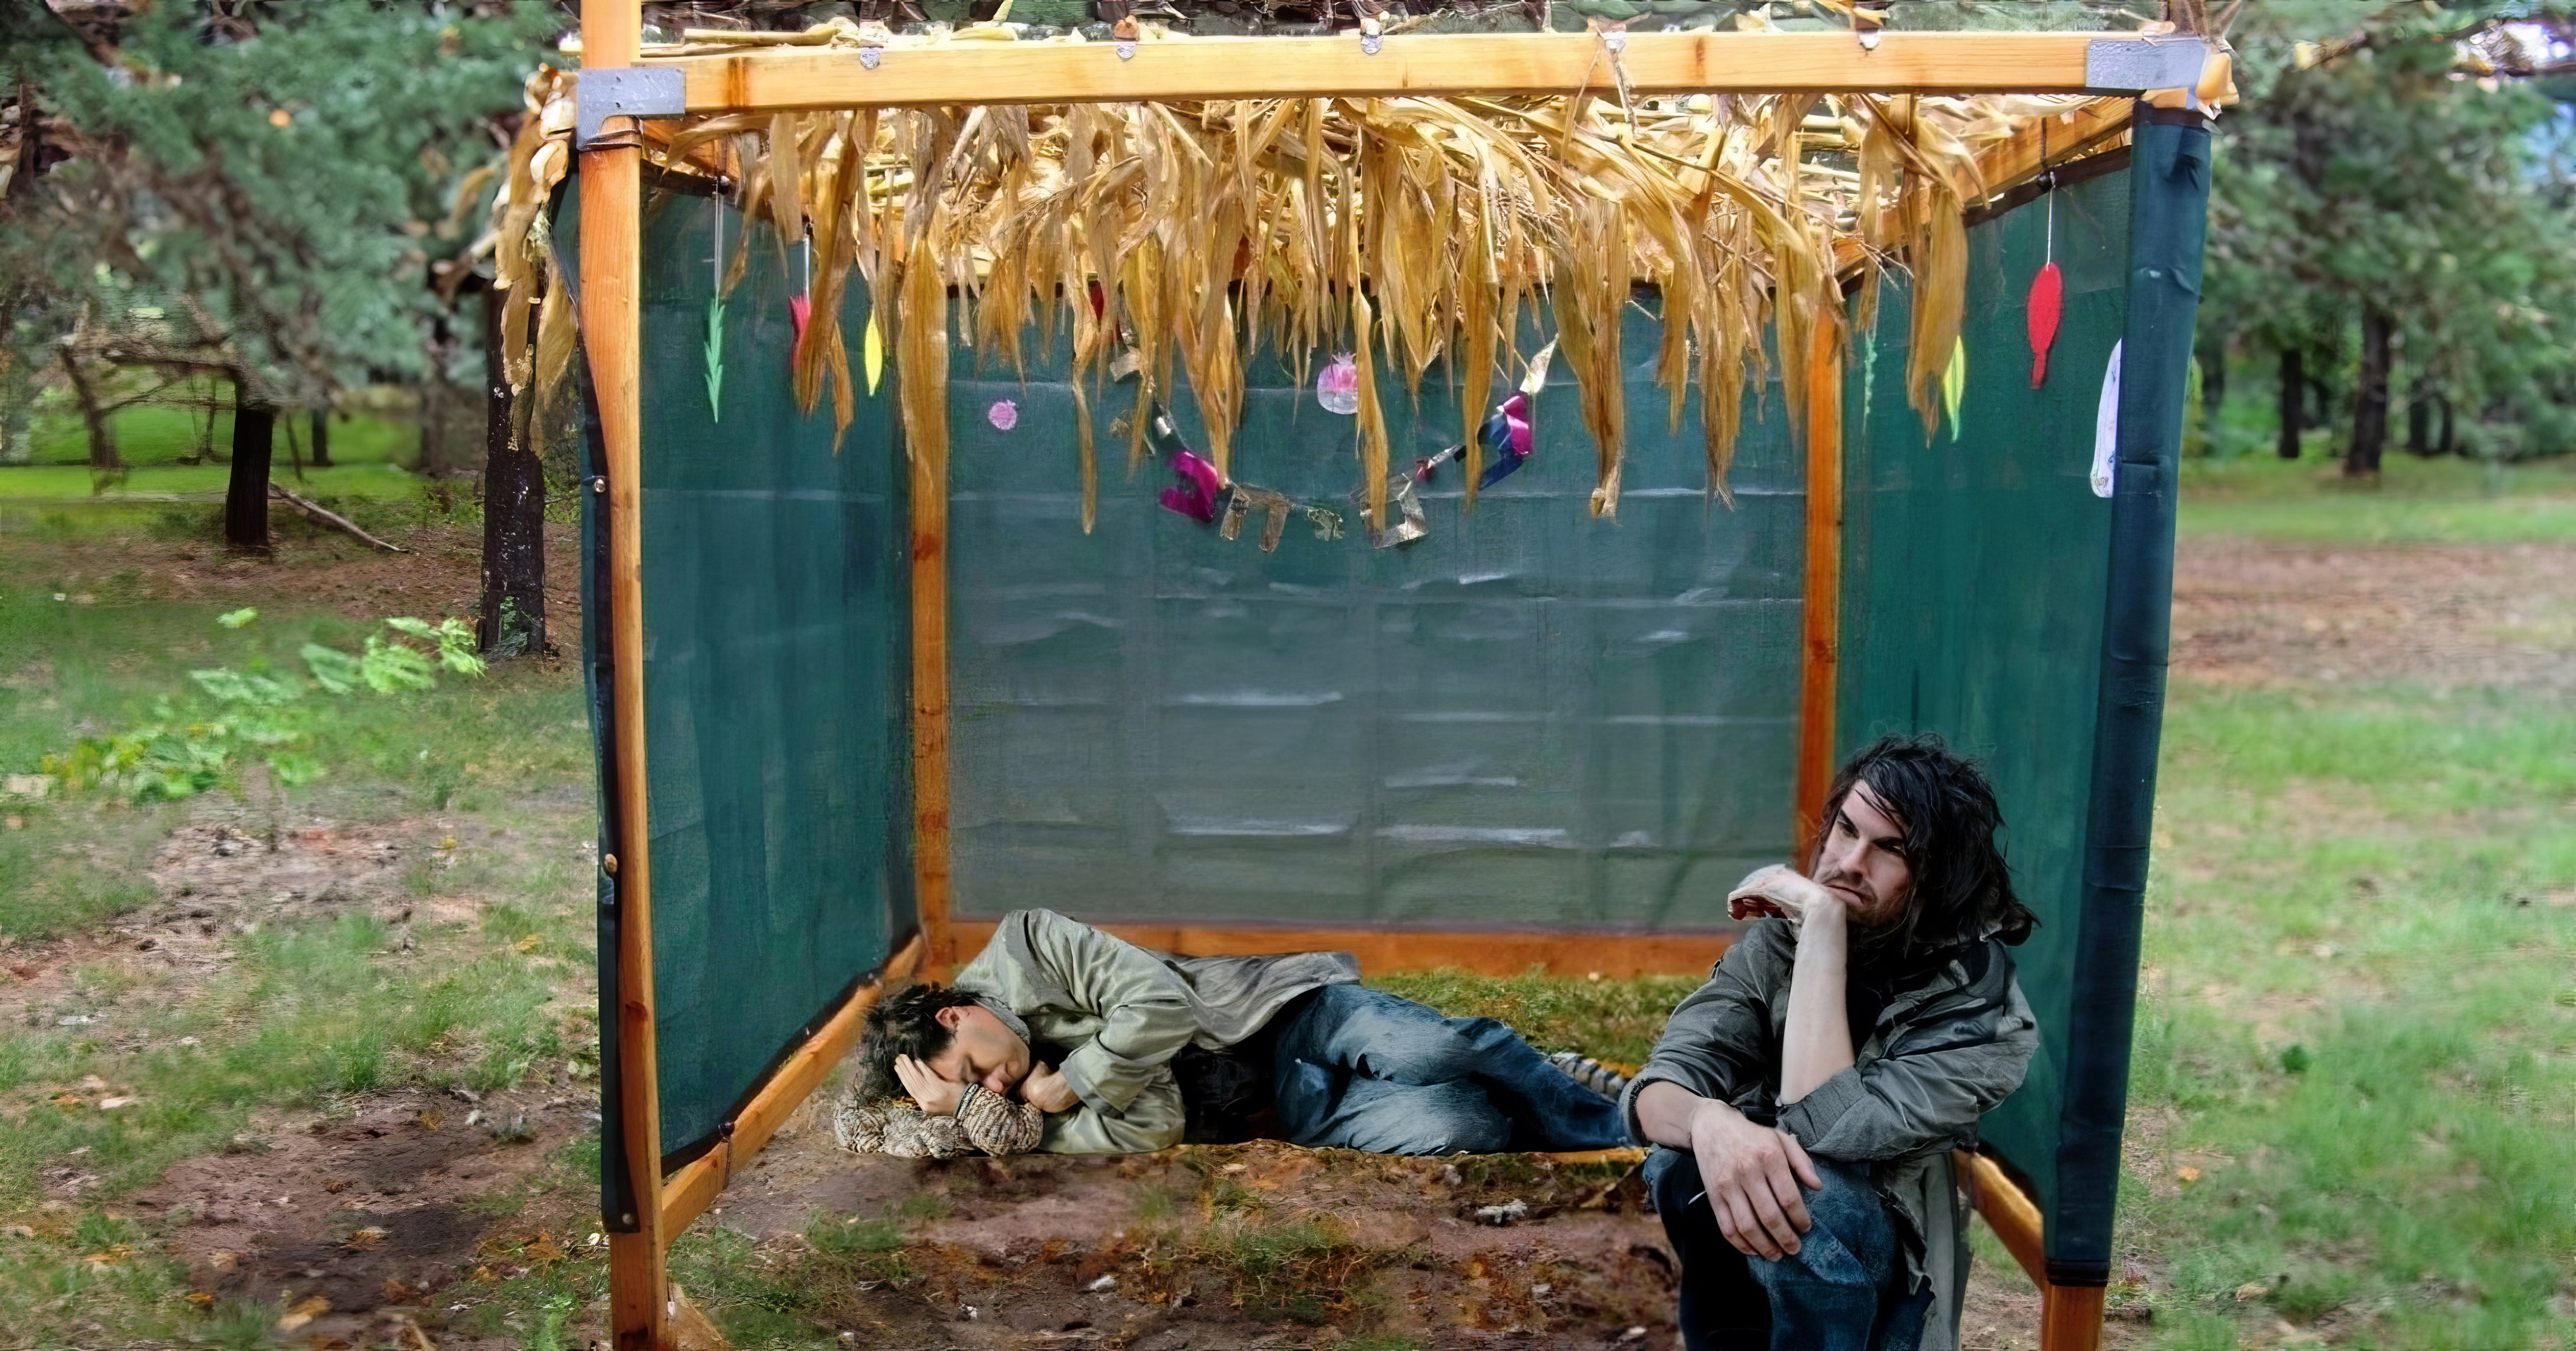 A sukkah with homeless looking peole in it.